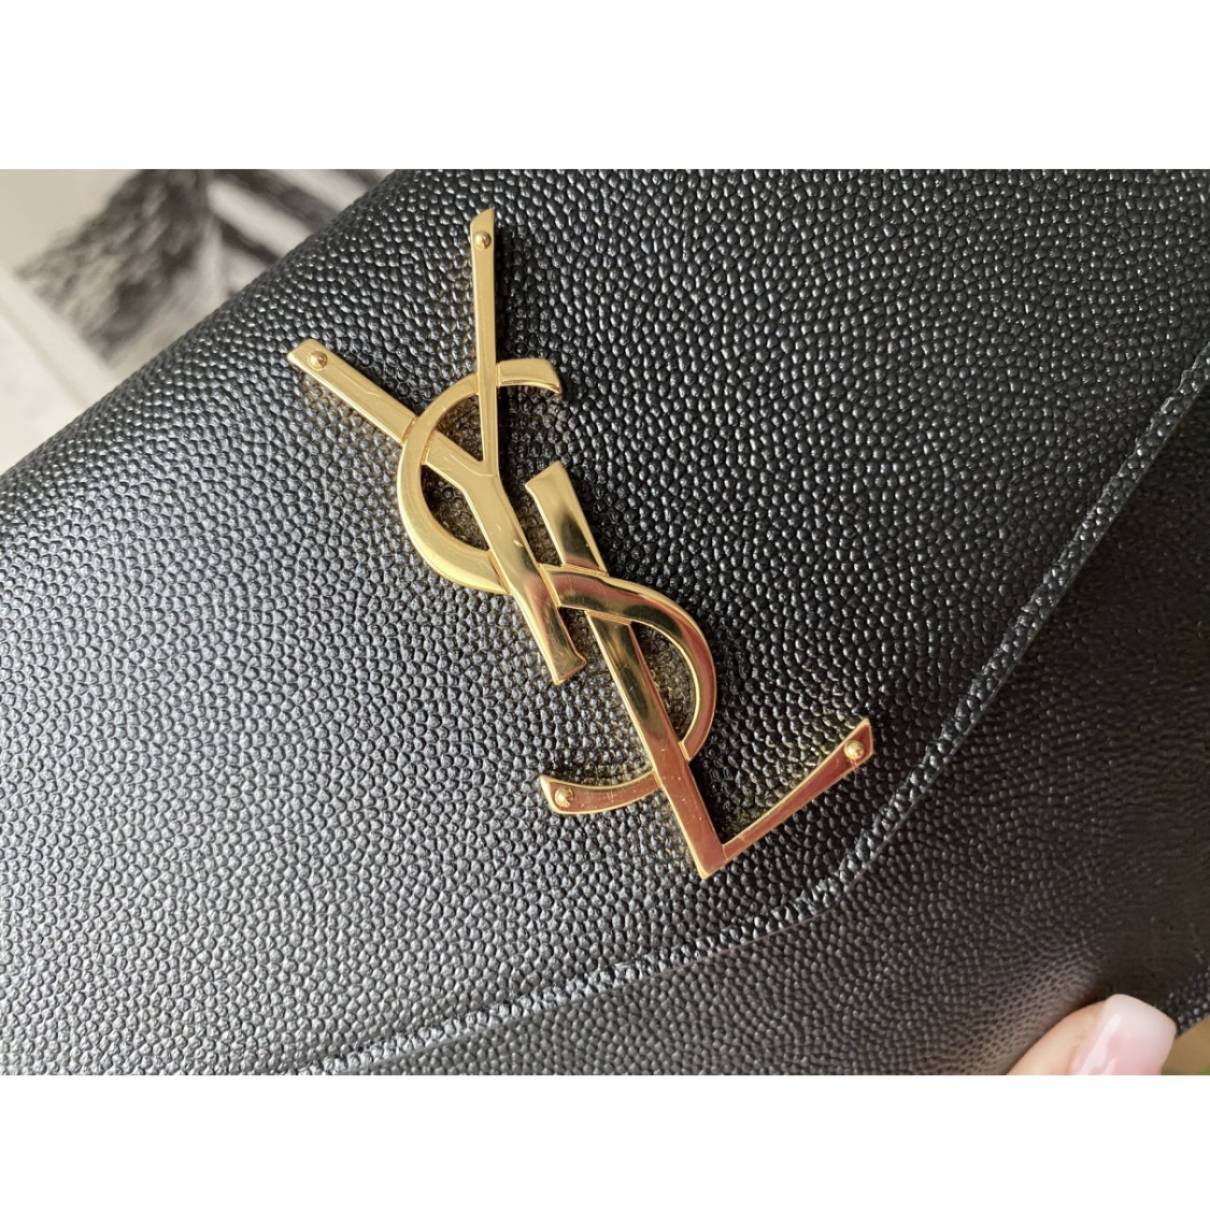 YSL UPTOWN POUCH IN BLACK WITH GOLD METAL FINISH